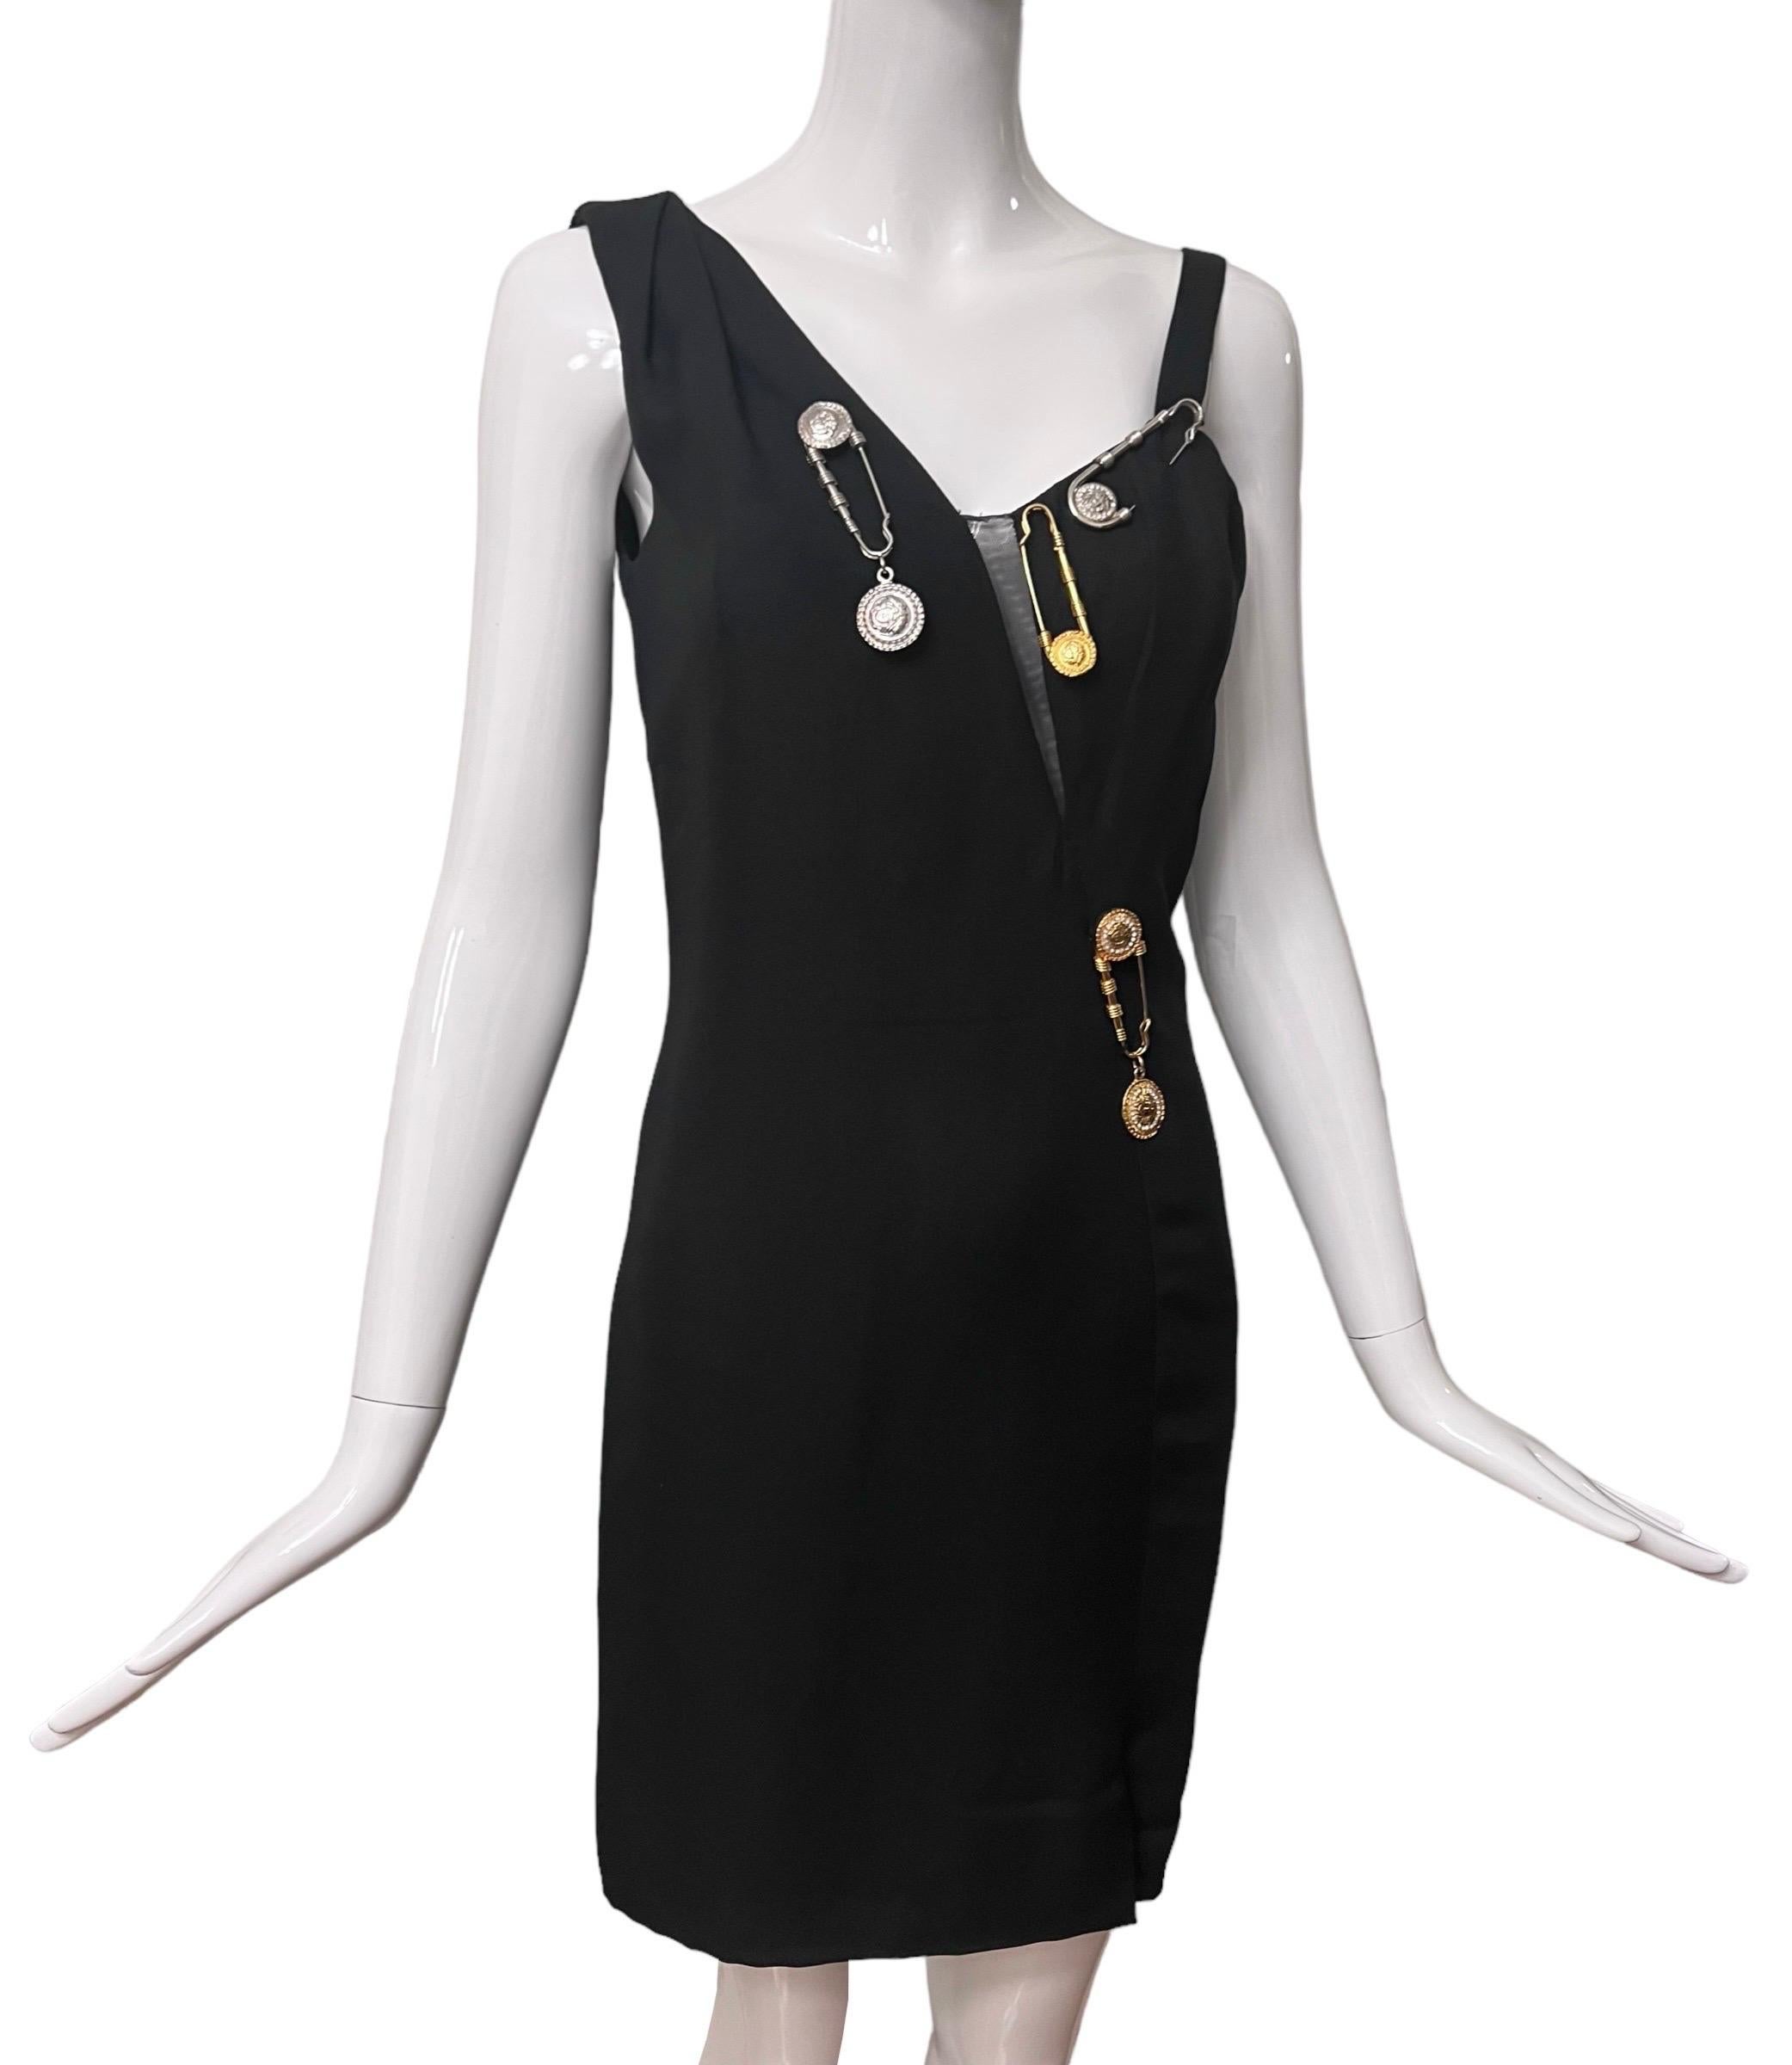 S/S 1994 Gianni Versace Safety Pin Medusa Embellished Black Mini Dress In Excellent Condition For Sale In Concord, NC